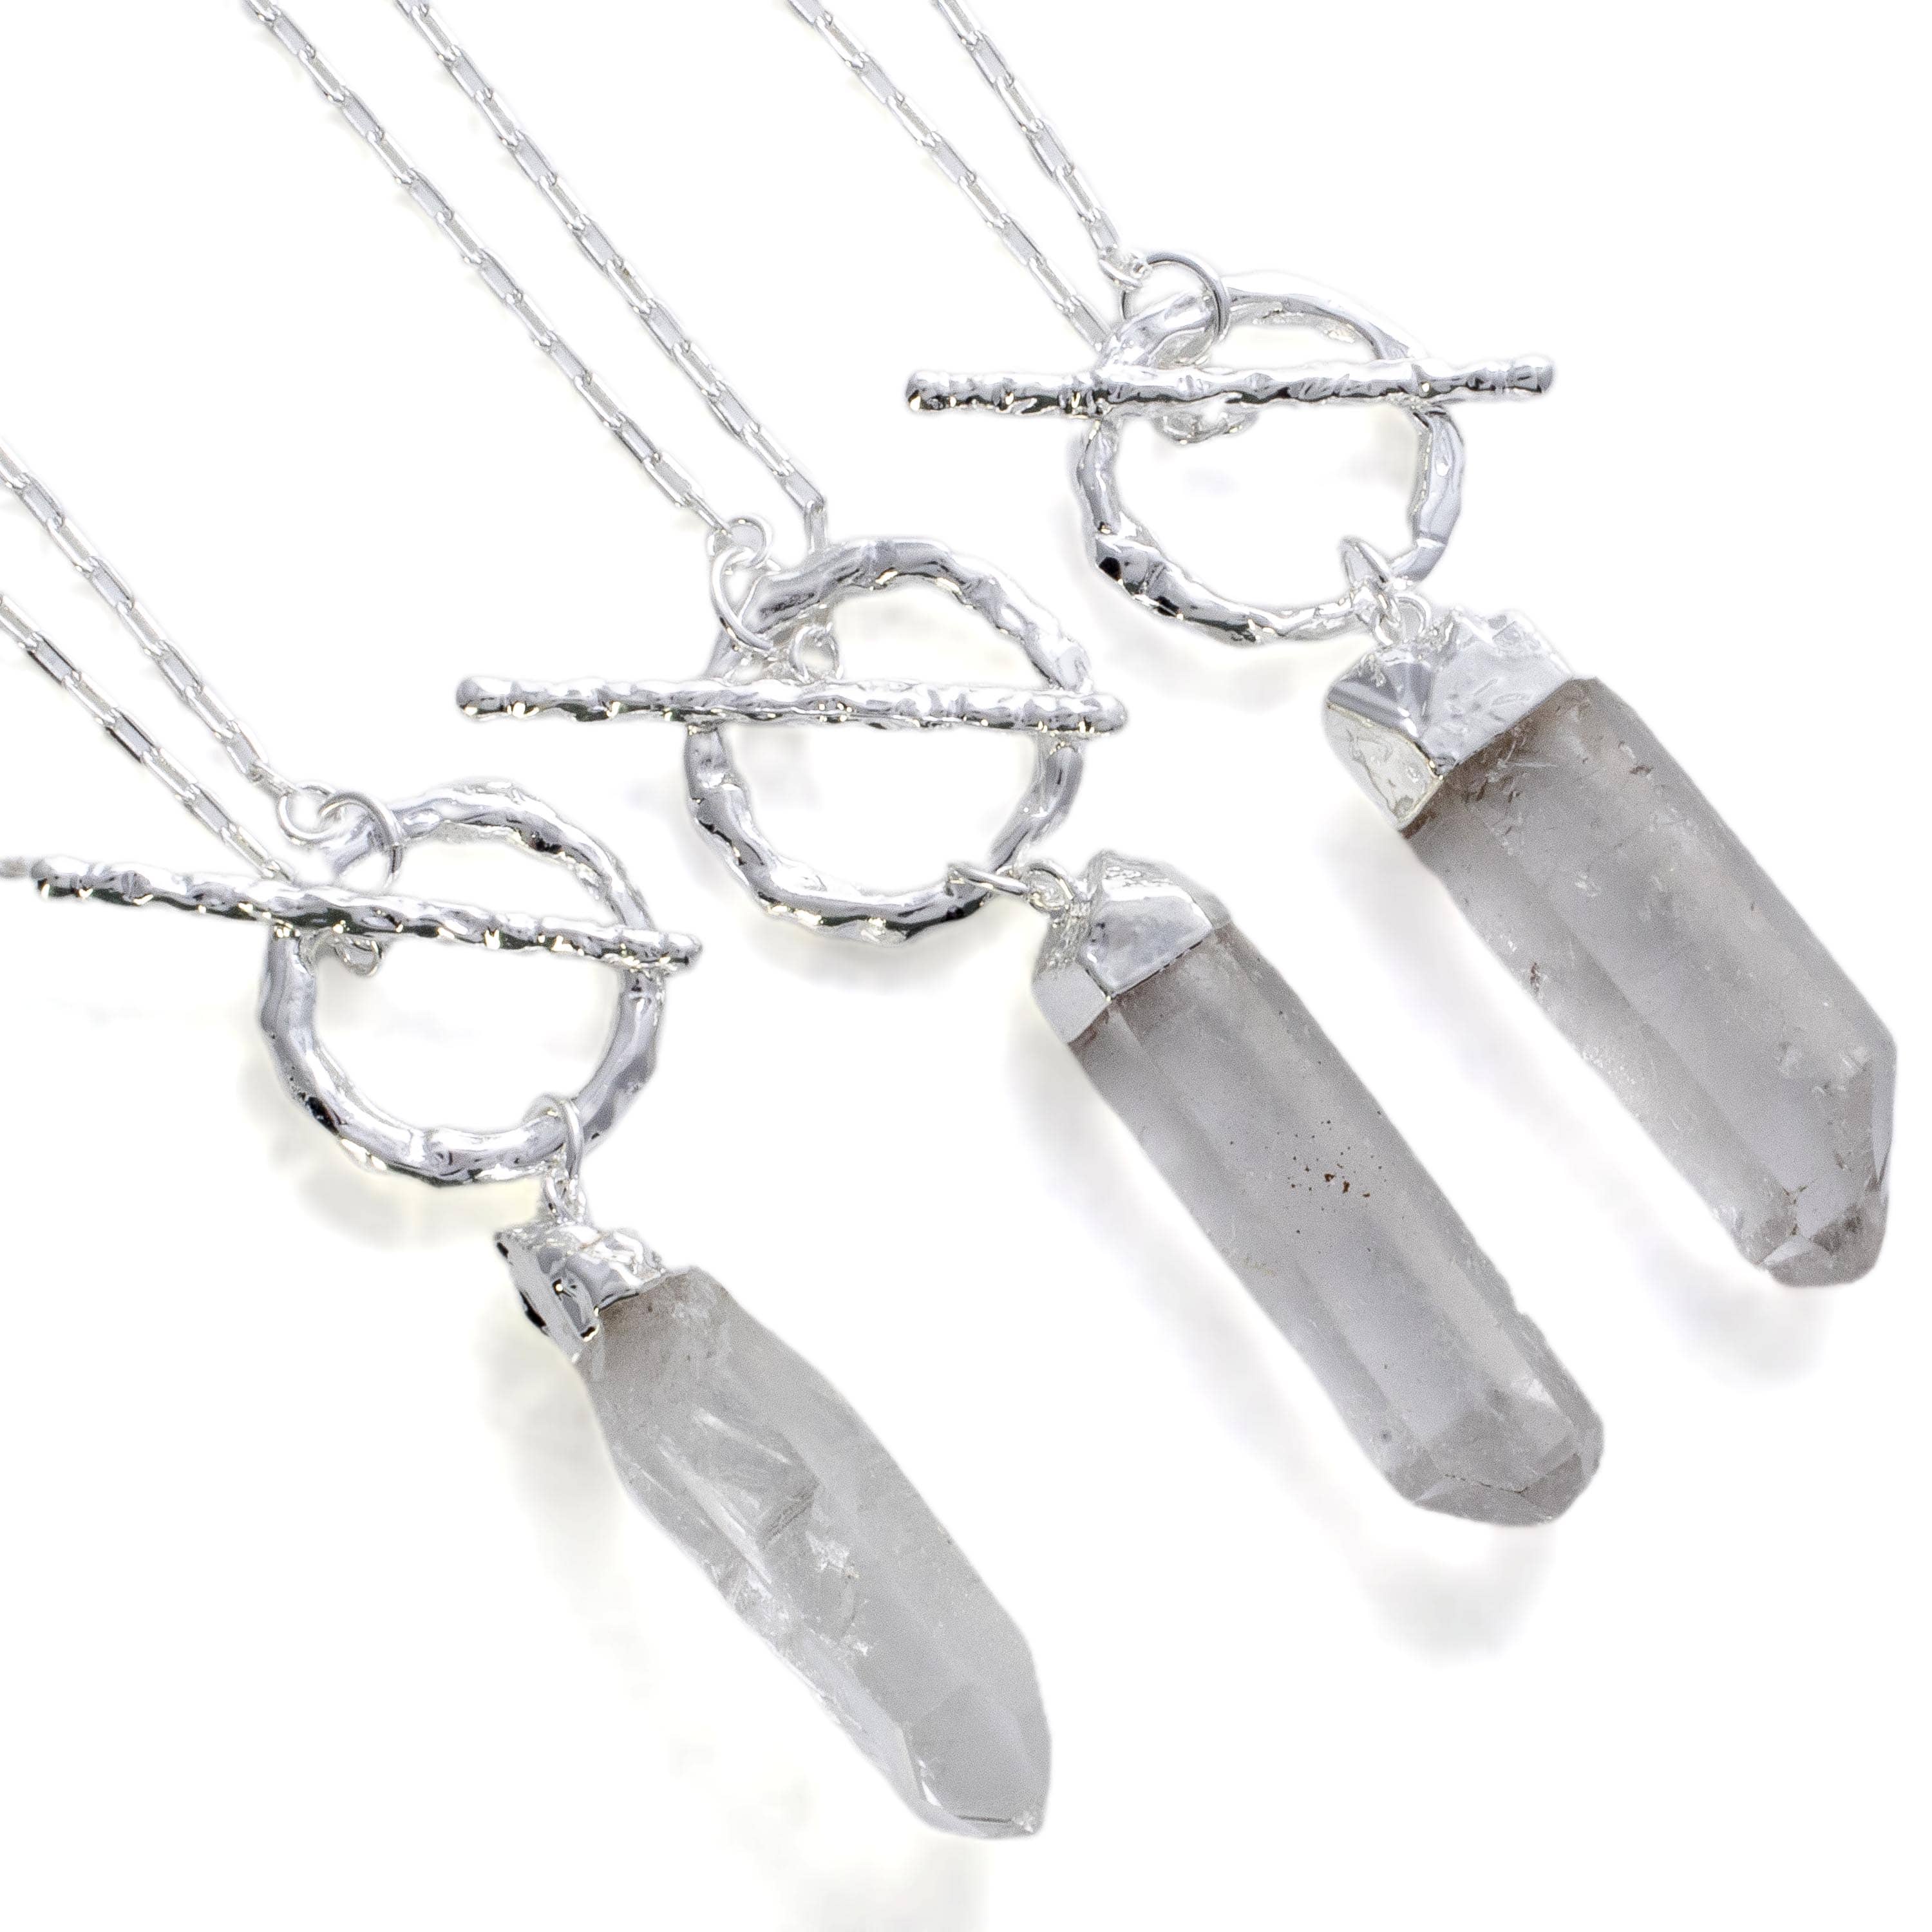 Kalifano Crystal Jewelry Clear Quartz Necklace with Toggle Clasp CJN-2021-QZ